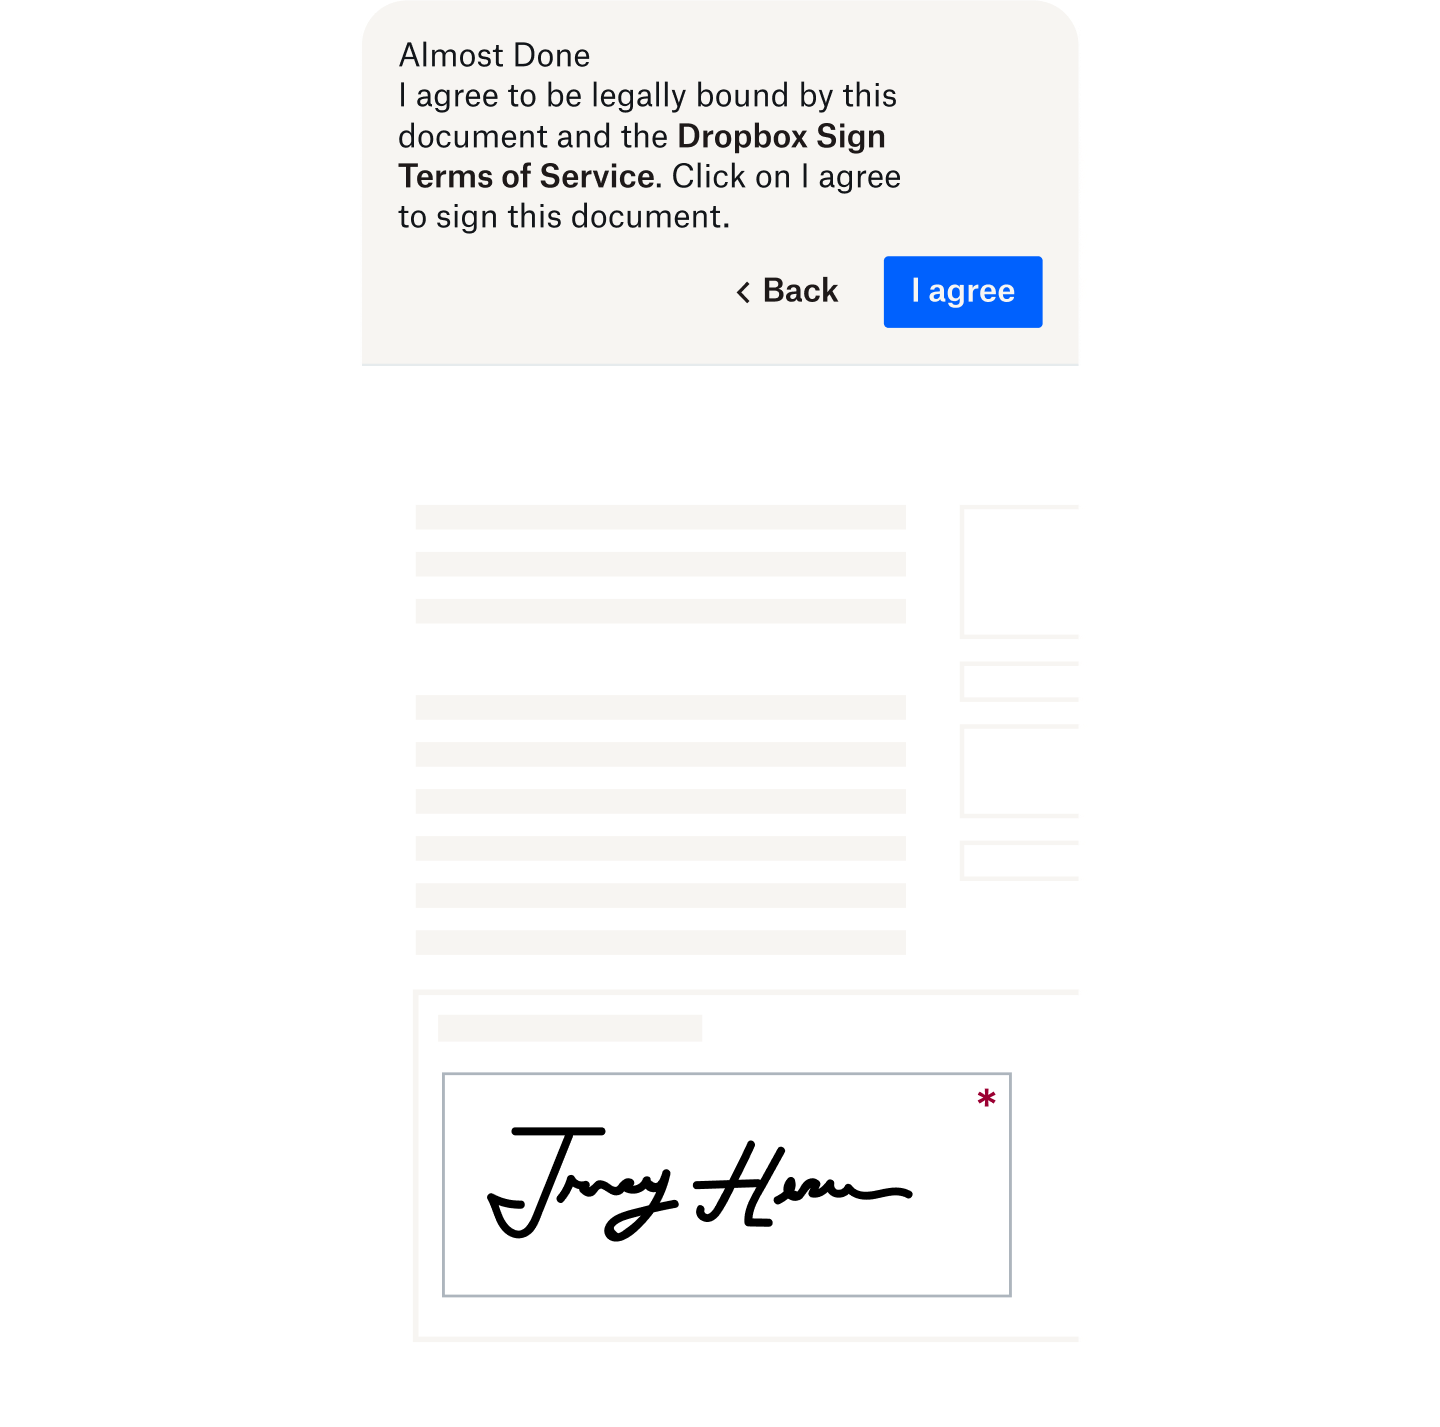  A consent notification telling the user than the eSignature document is legally binding